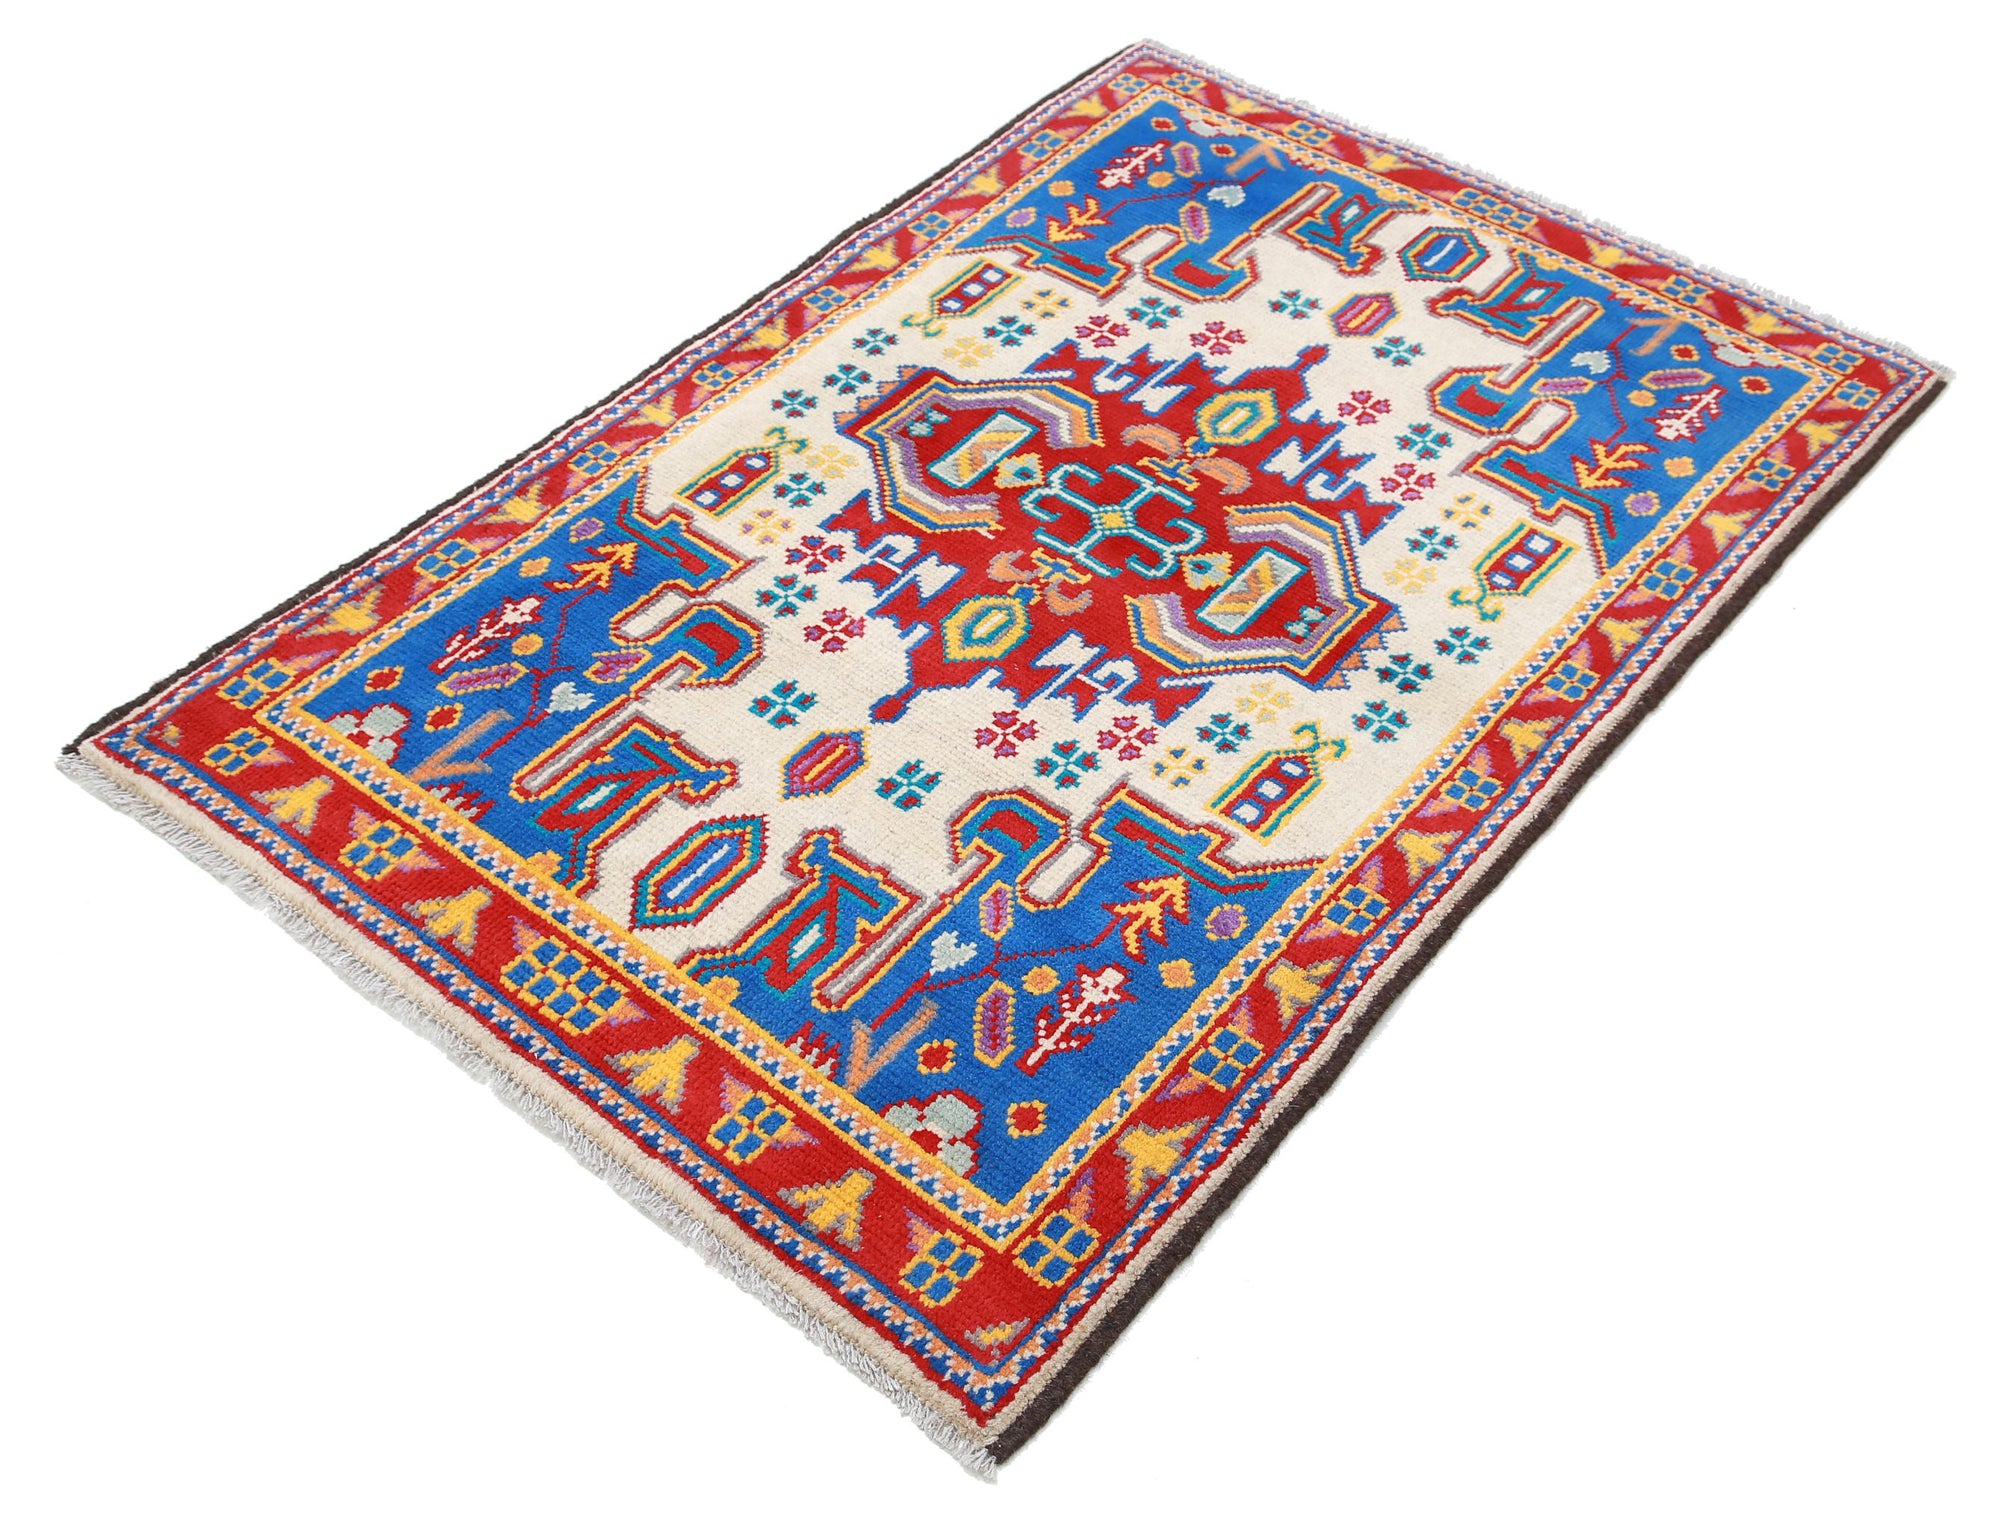 Revival-hand-knotted-qarghani-wool-rug-5014197-2.jpg